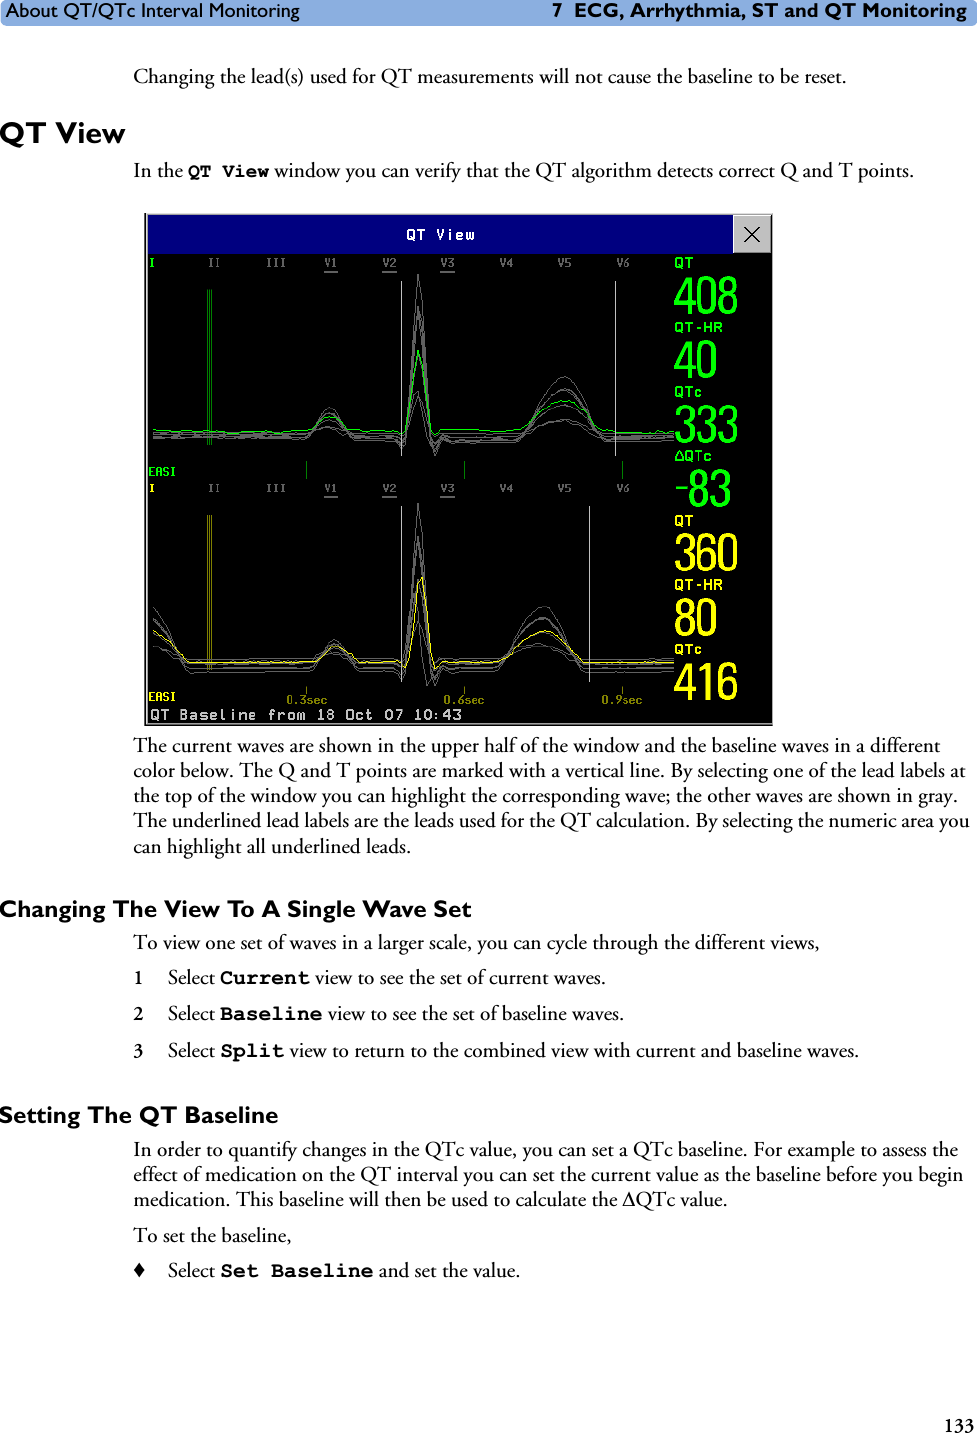 About QT/QTc Interval Monitoring 7 ECG, Arrhythmia, ST and QT Monitoring133Changing the lead(s) used for QT measurements will not cause the baseline to be reset. QT ViewIn the QT View window you can verify that the QT algorithm detects correct Q and T points. The current waves are shown in the upper half of the window and the baseline waves in a different color below. The Q and T points are marked with a vertical line. By selecting one of the lead labels at the top of the window you can highlight the corresponding wave; the other waves are shown in gray. The underlined lead labels are the leads used for the QT calculation. By selecting the numeric area you can highlight all underlined leads. Changing The View To A Single Wave SetTo view one set of waves in a larger scale, you can cycle through the different views, 1Select Current view to see the set of current waves.2Select Baseline view to see the set of baseline waves. 3Select Split view to return to the combined view with current and baseline waves. Setting The QT BaselineIn order to quantify changes in the QTc value, you can set a QTc baseline. For example to assess the effect of medication on the QT interval you can set the current value as the baseline before you begin medication. This baseline will then be used to calculate the &apos;QTc value. To set the baseline, ♦Select Set Baseline and set the value. 